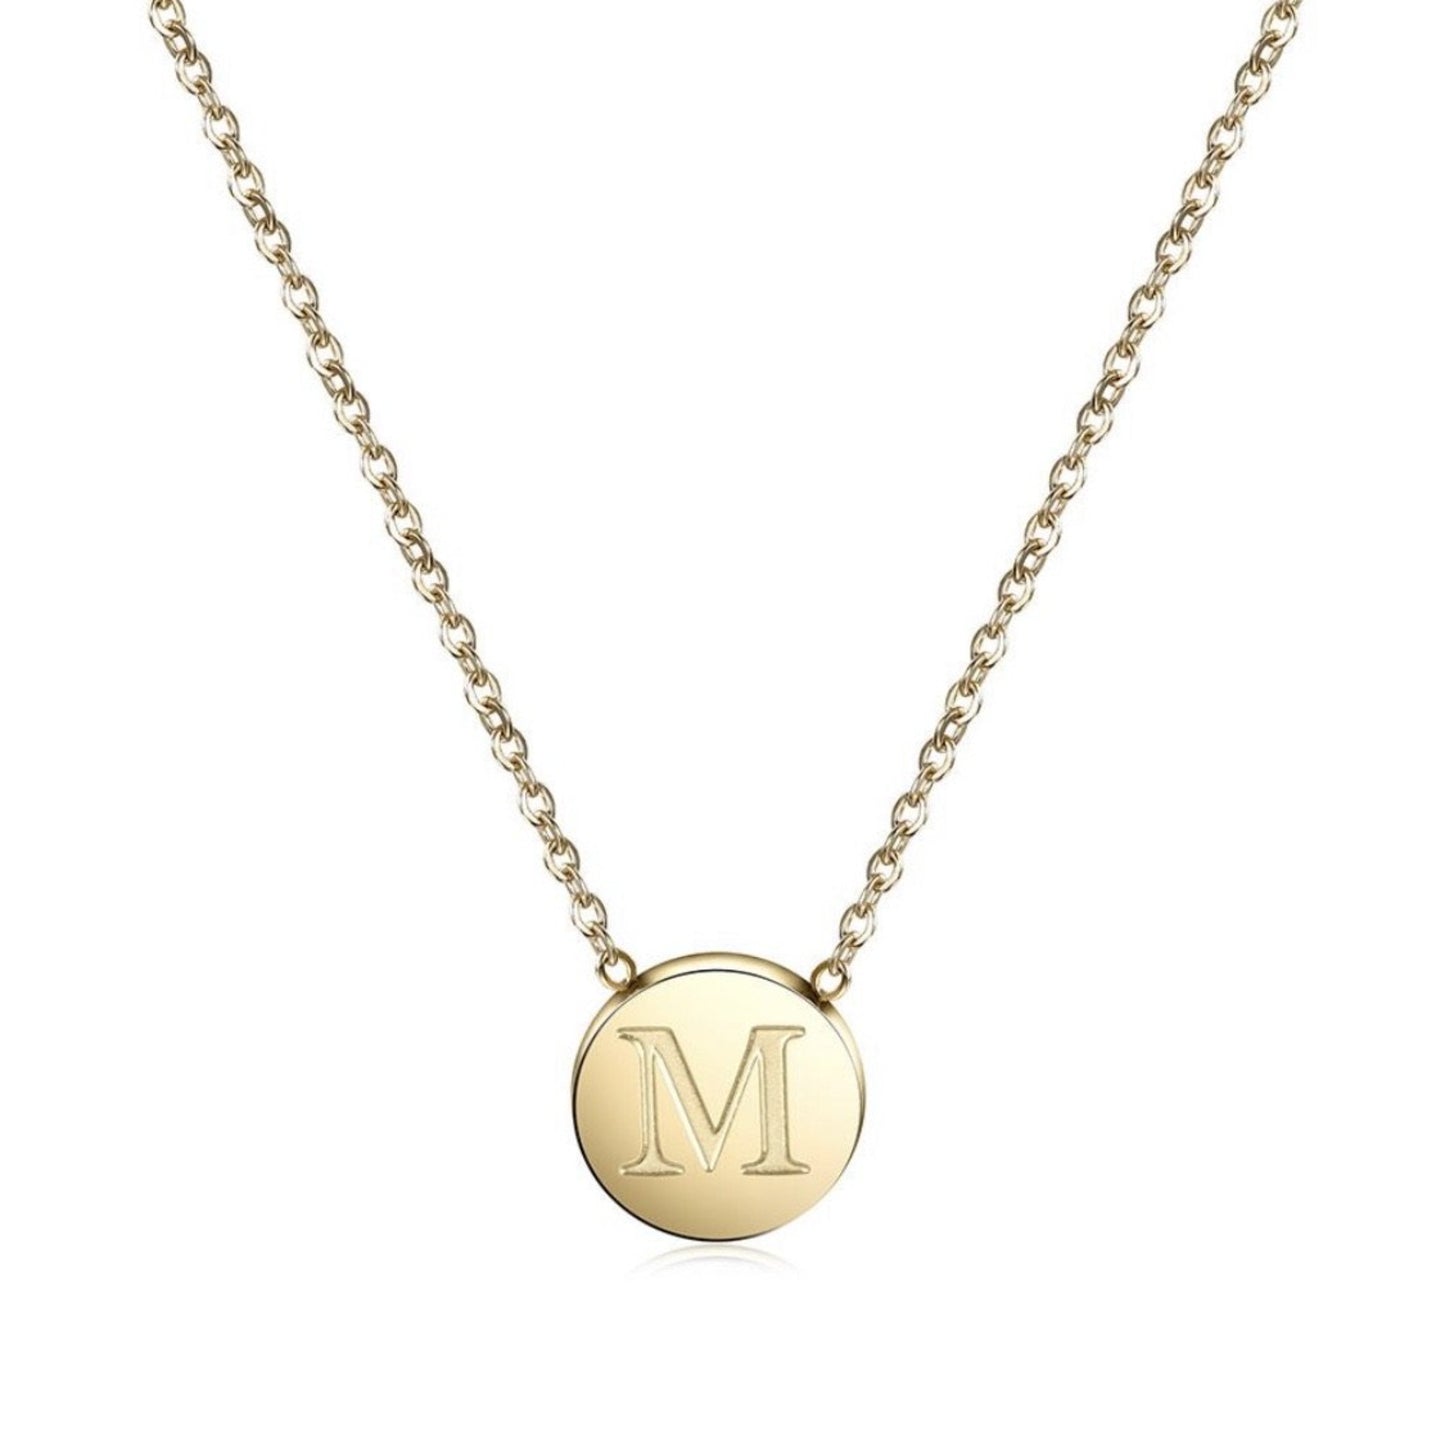 The most gorgeous inicial necklace